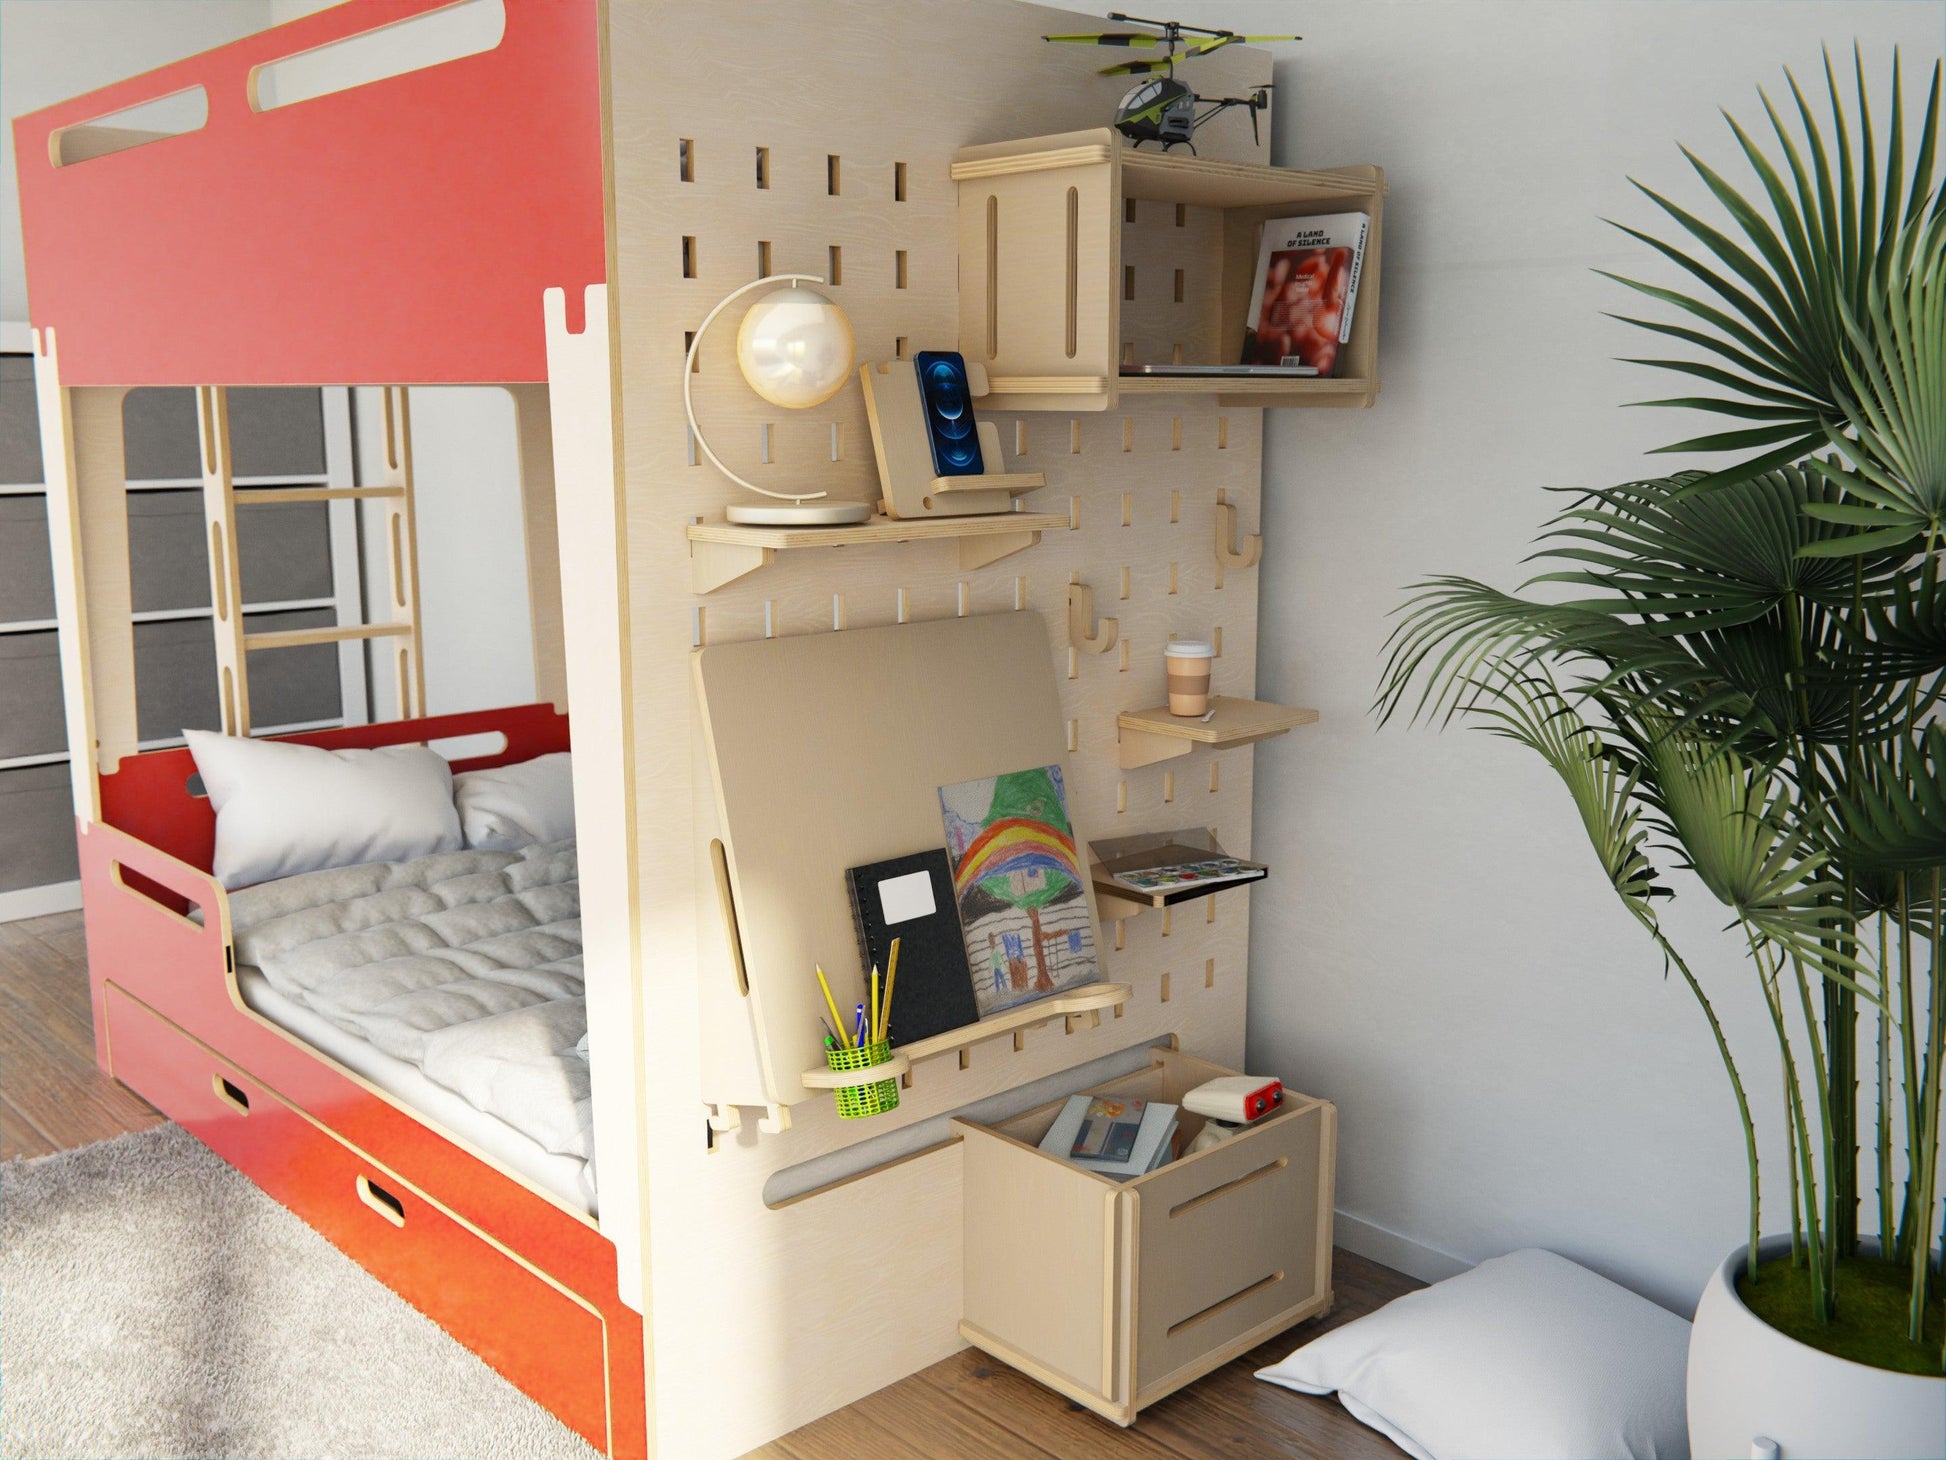 Scandinavian-style bunk beds, crafted from plywood. Complete with study set and storage. Available in red.